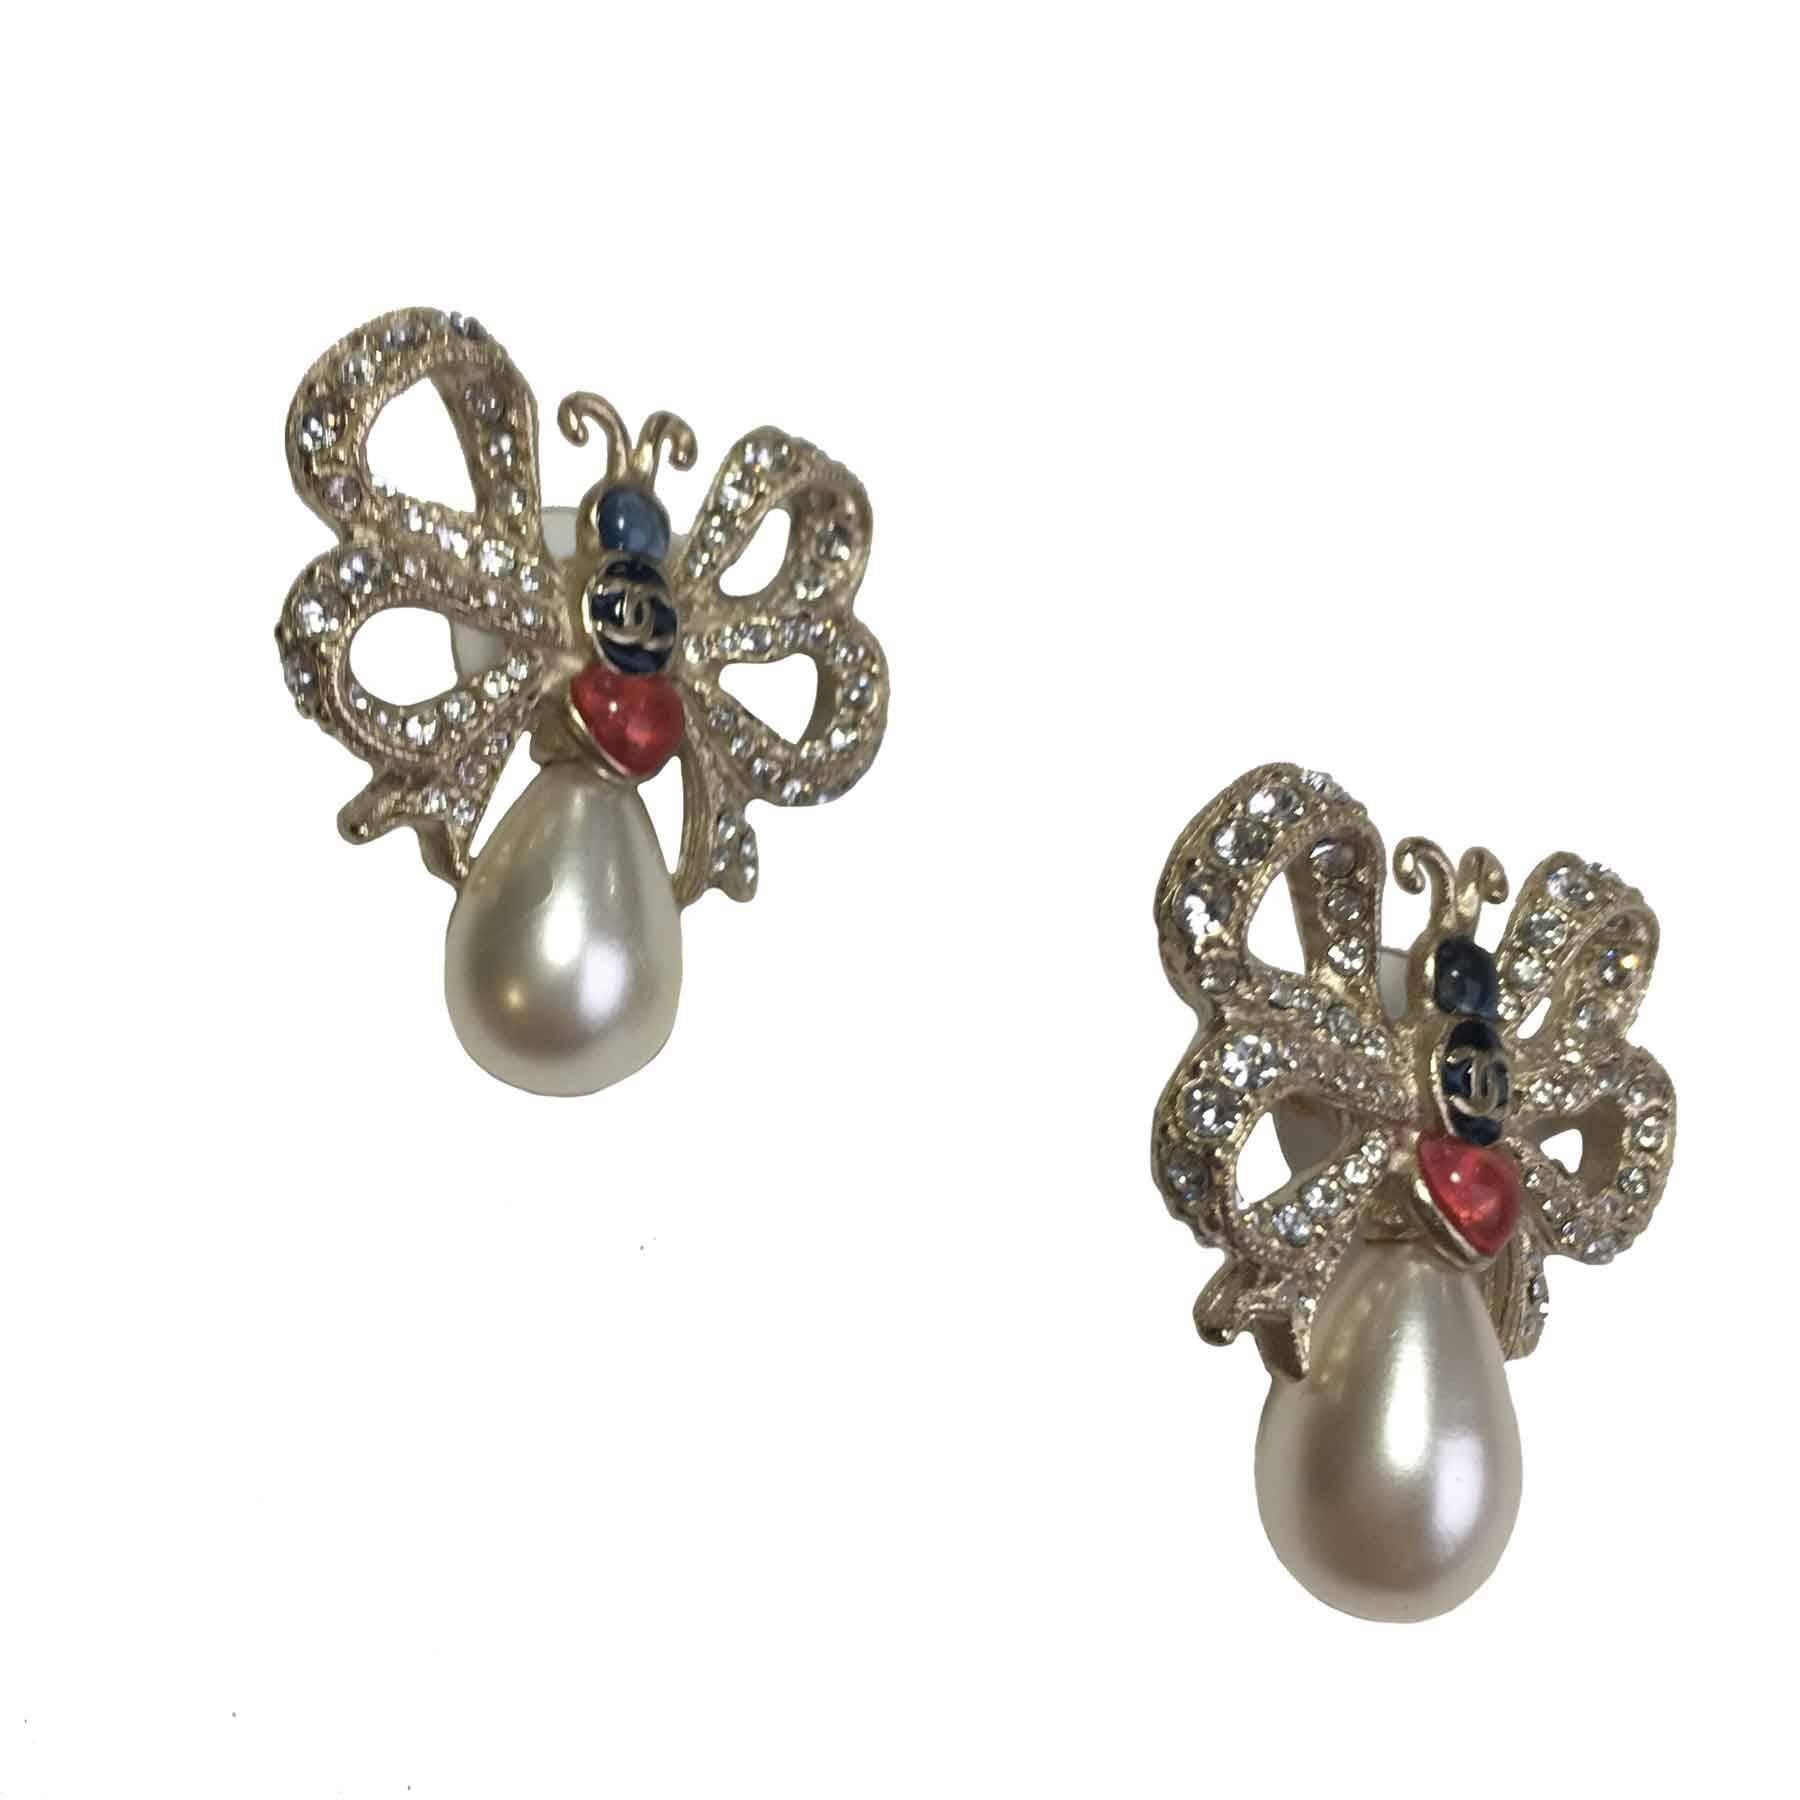 Rare Chanel earrings in the shape of a butterfly adorned with rhinestones and blue and red glass paste, a pear shape glass pearl finishes this magnificent earrings.
From the Fall/winter 2016 collection
Very slight scratch on one of the two